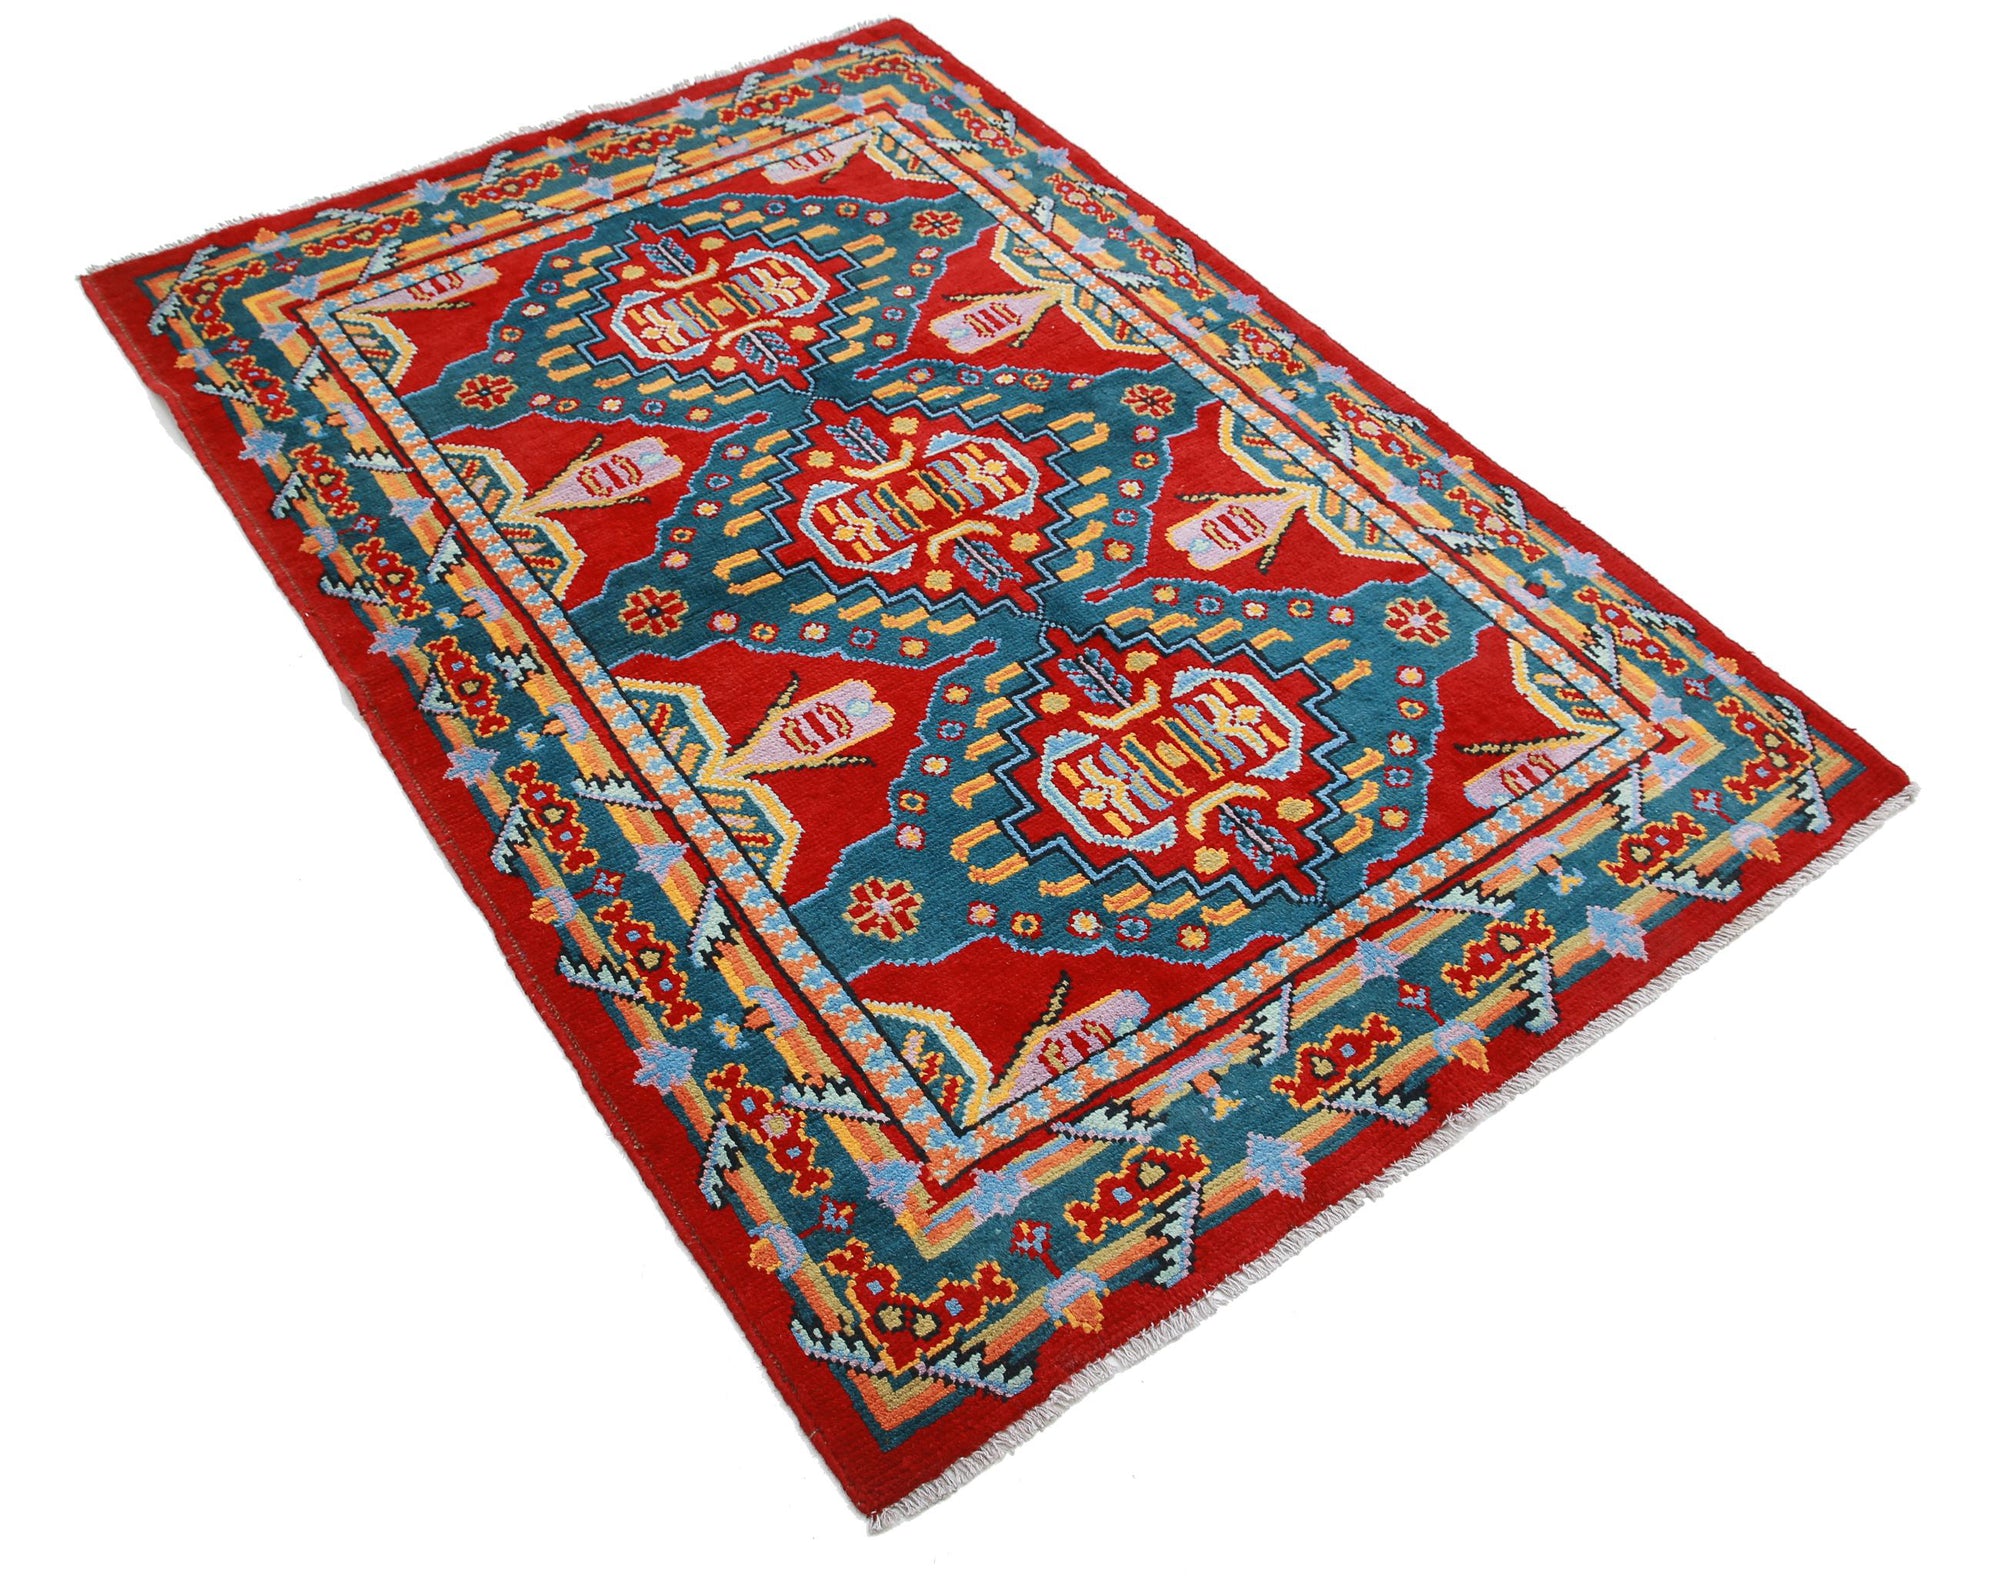 Revival-hand-knotted-qarghani-wool-rug-5014210-1.jpg